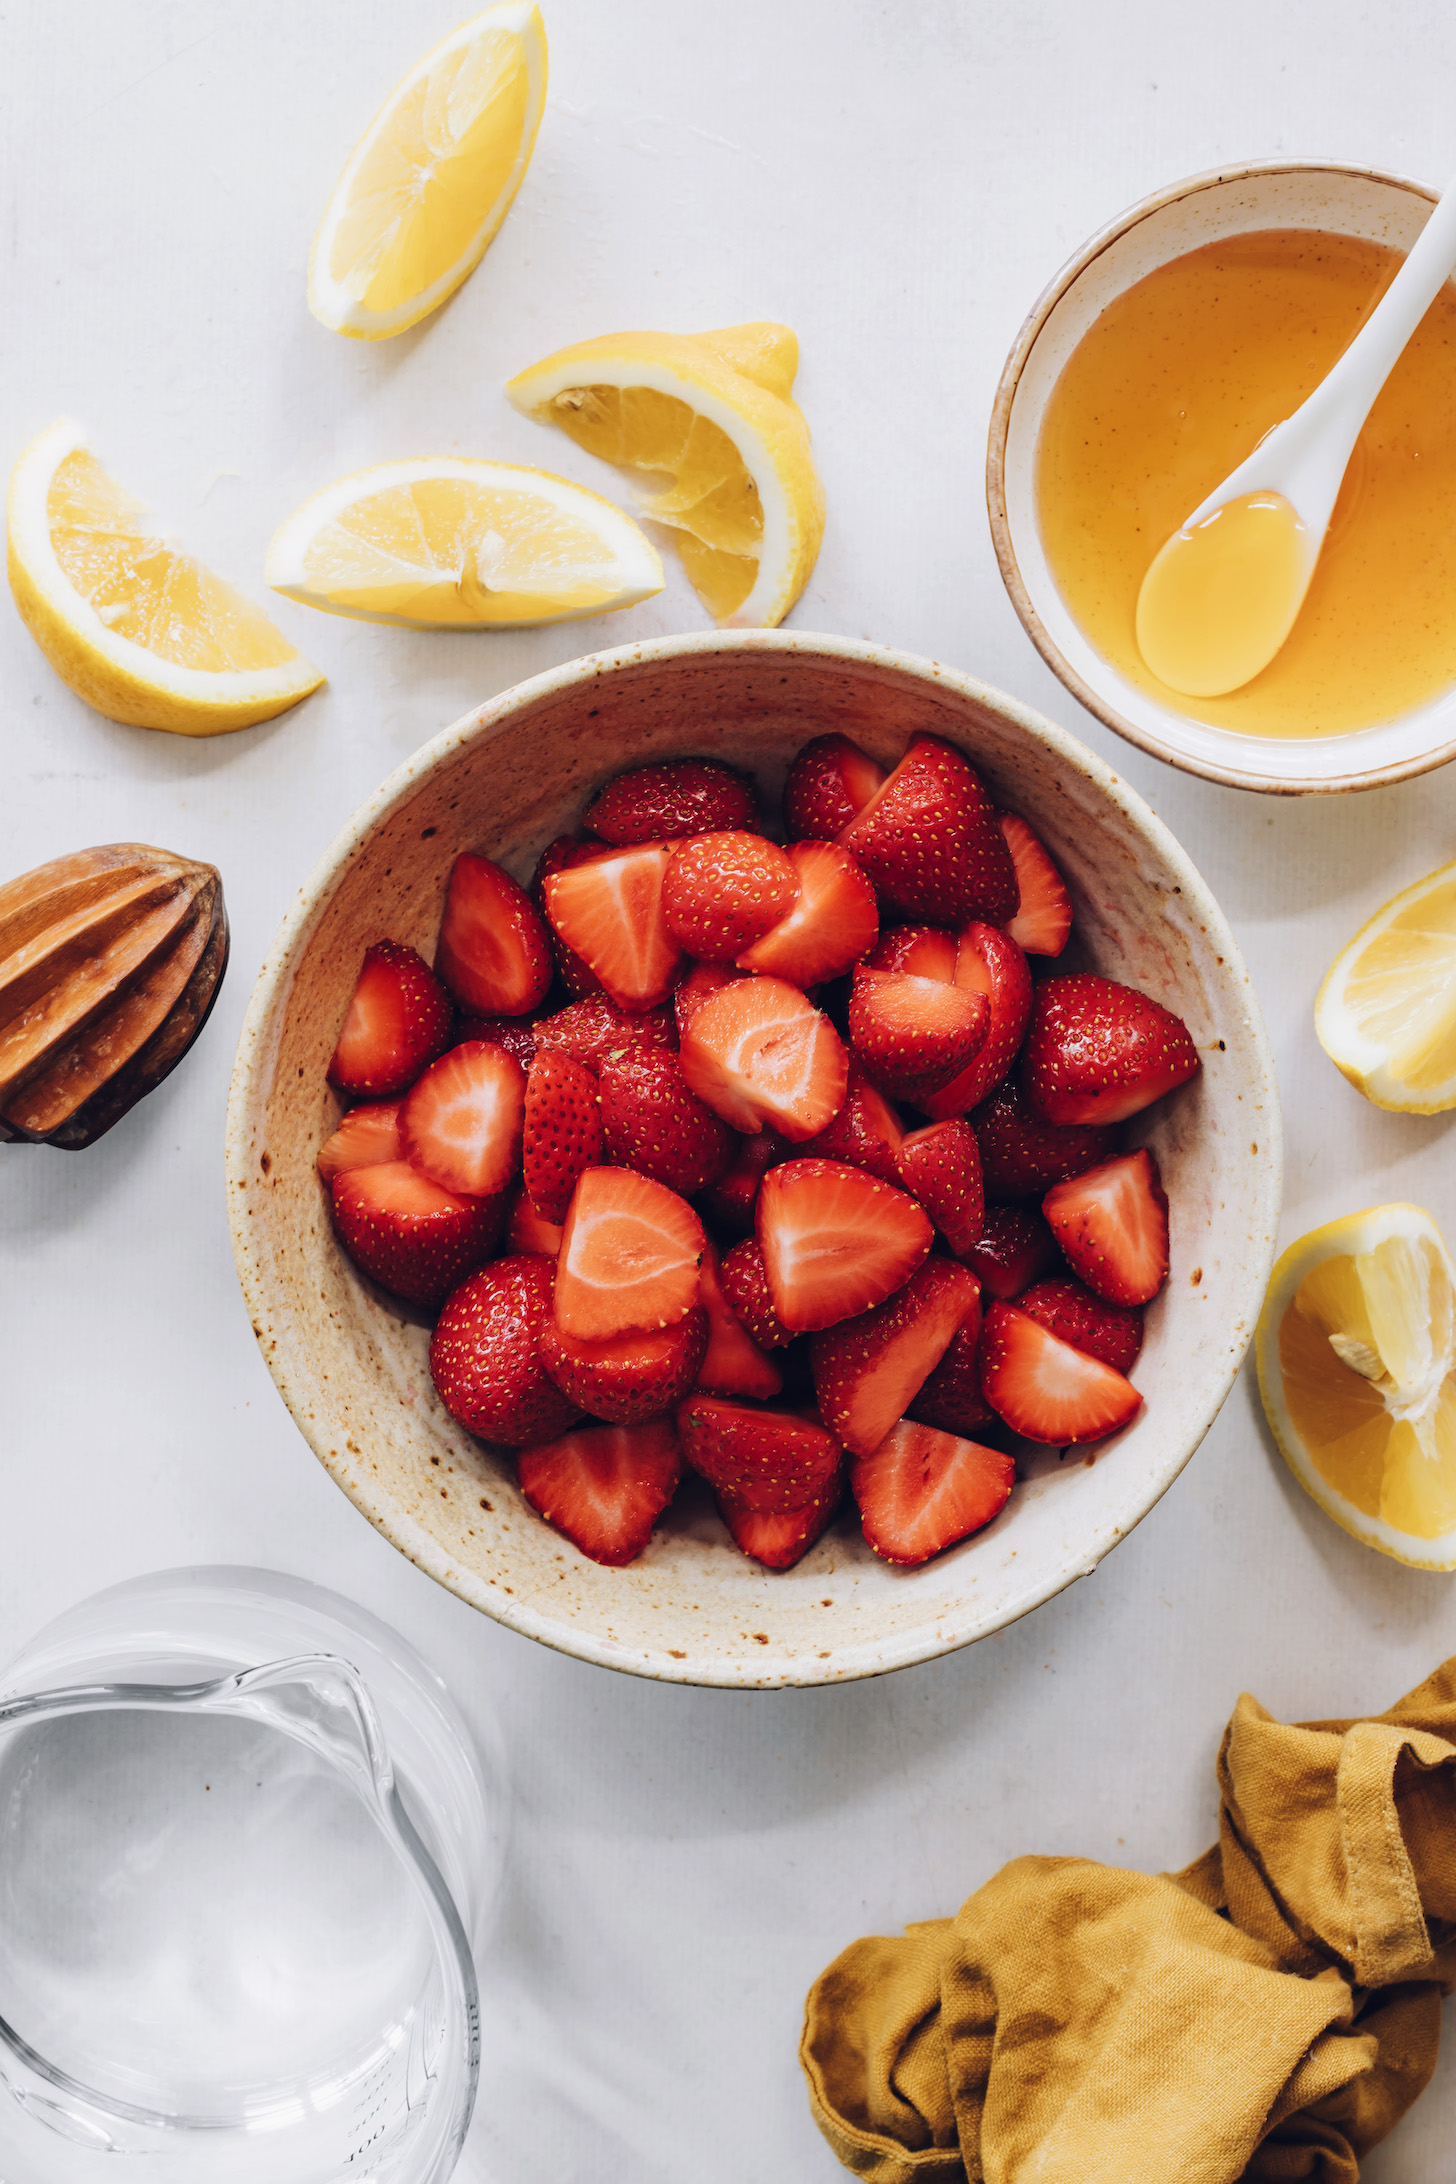 Lemon wedges, agave, and water around a bowl of sliced strawberries